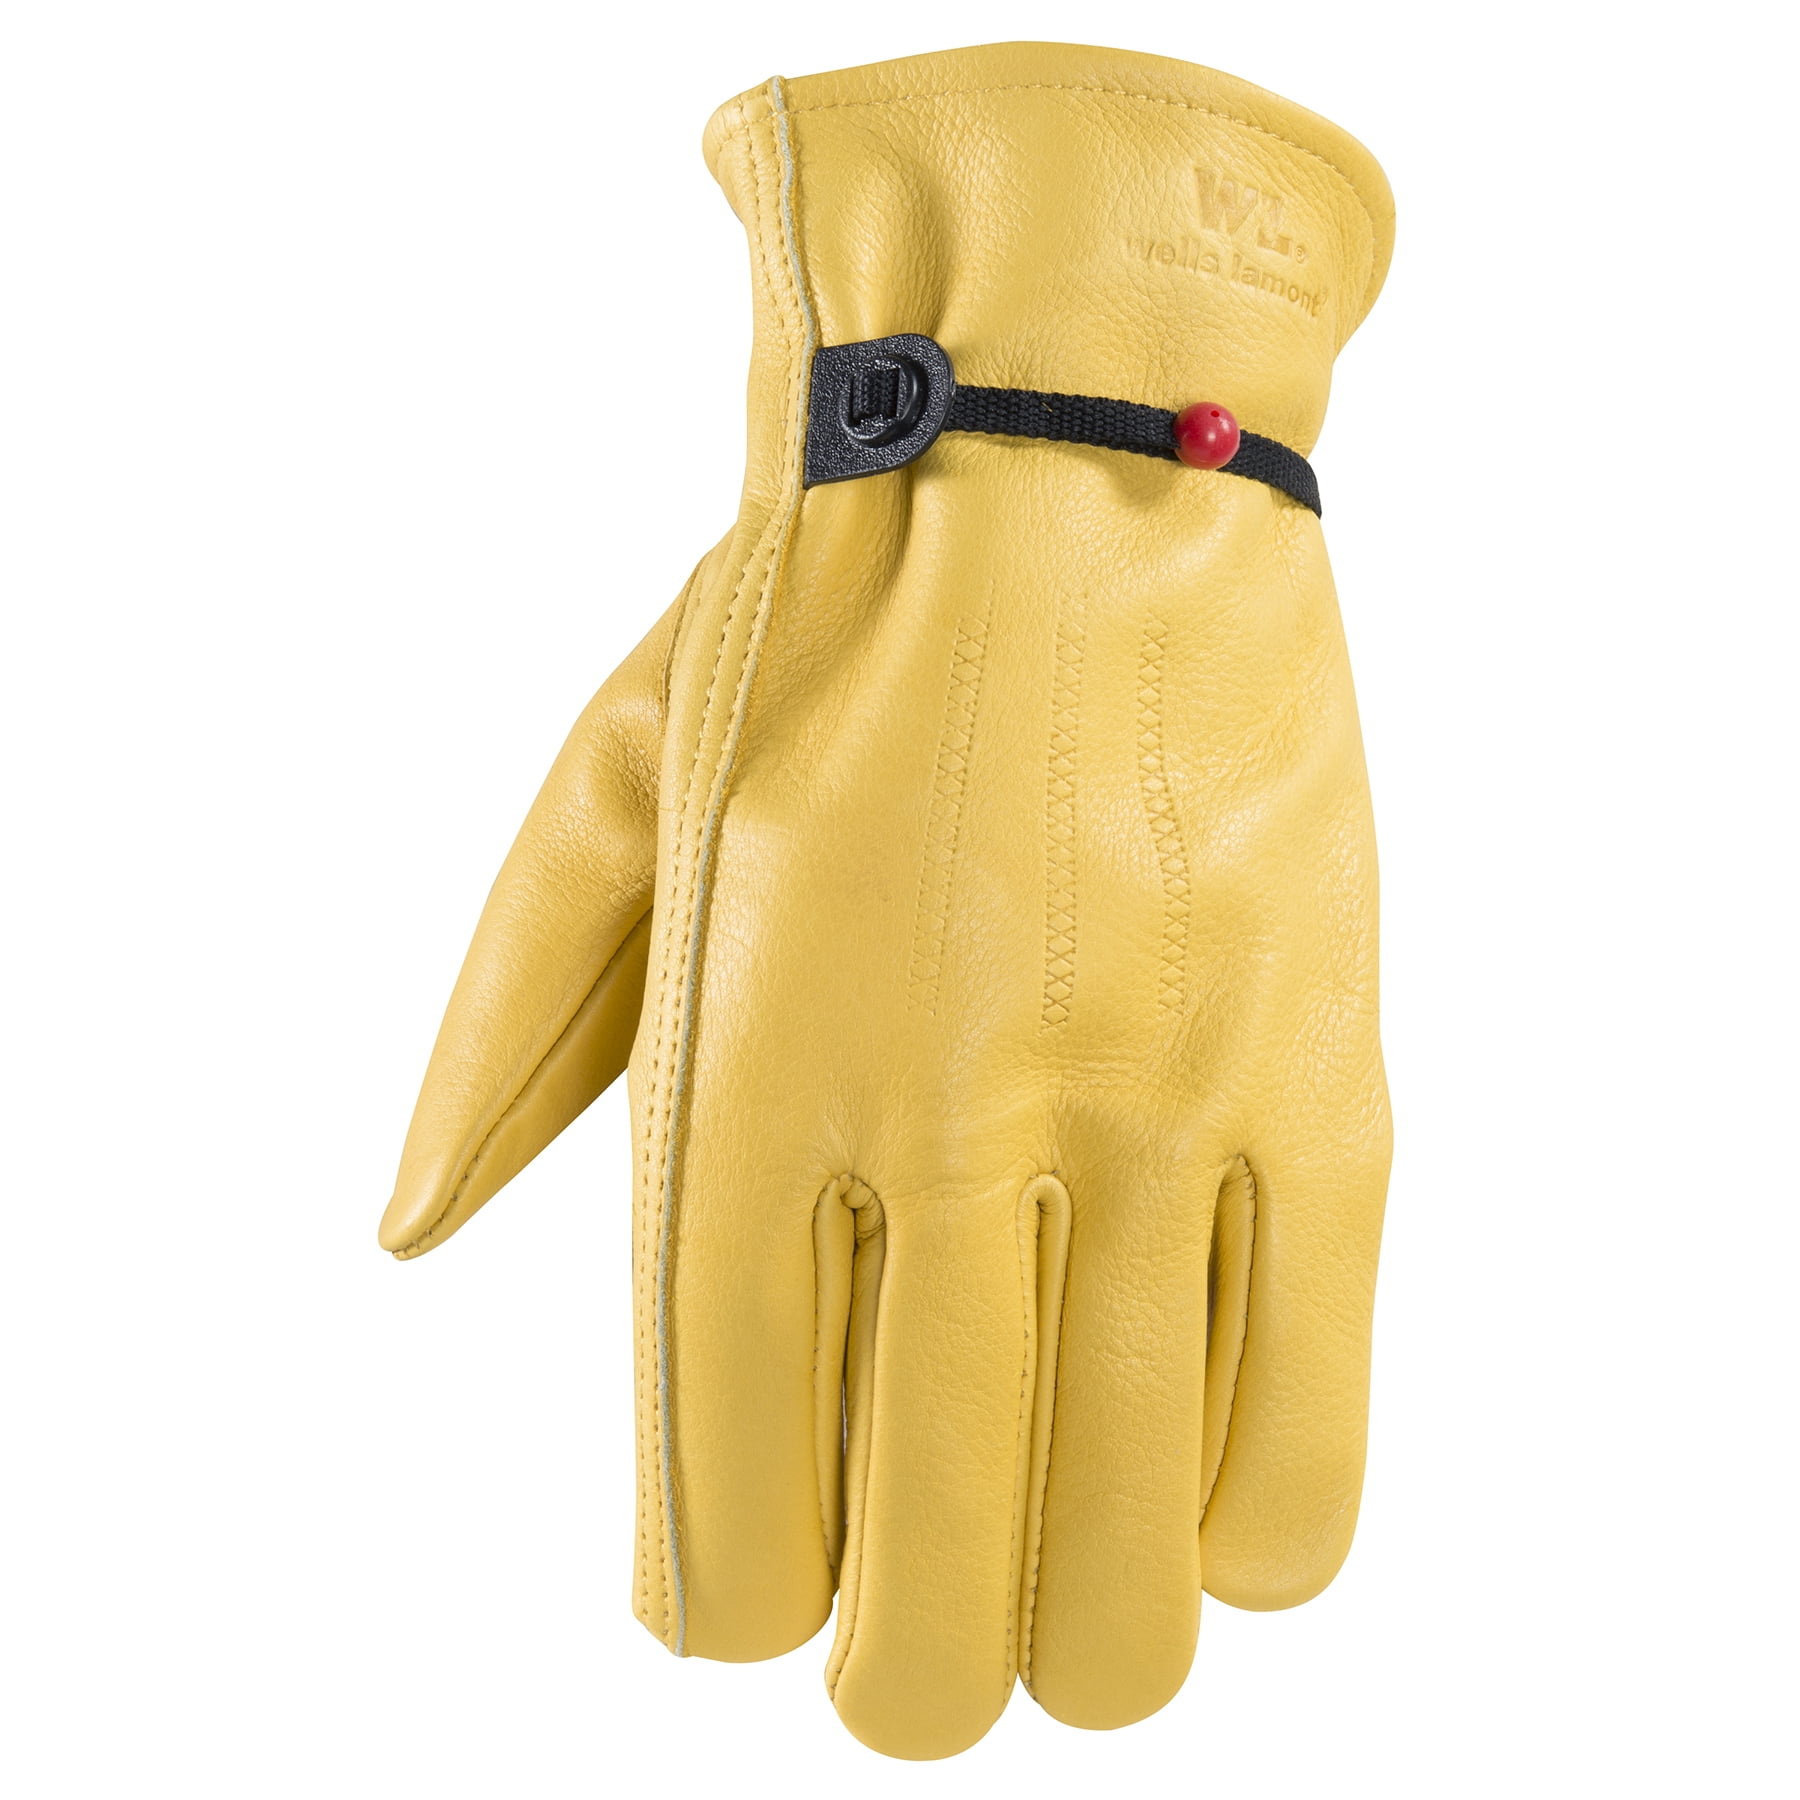 Details about   Wells Lamont Cold Weather All Purpose Fleece Lined Nitrate Coated Gloves size L